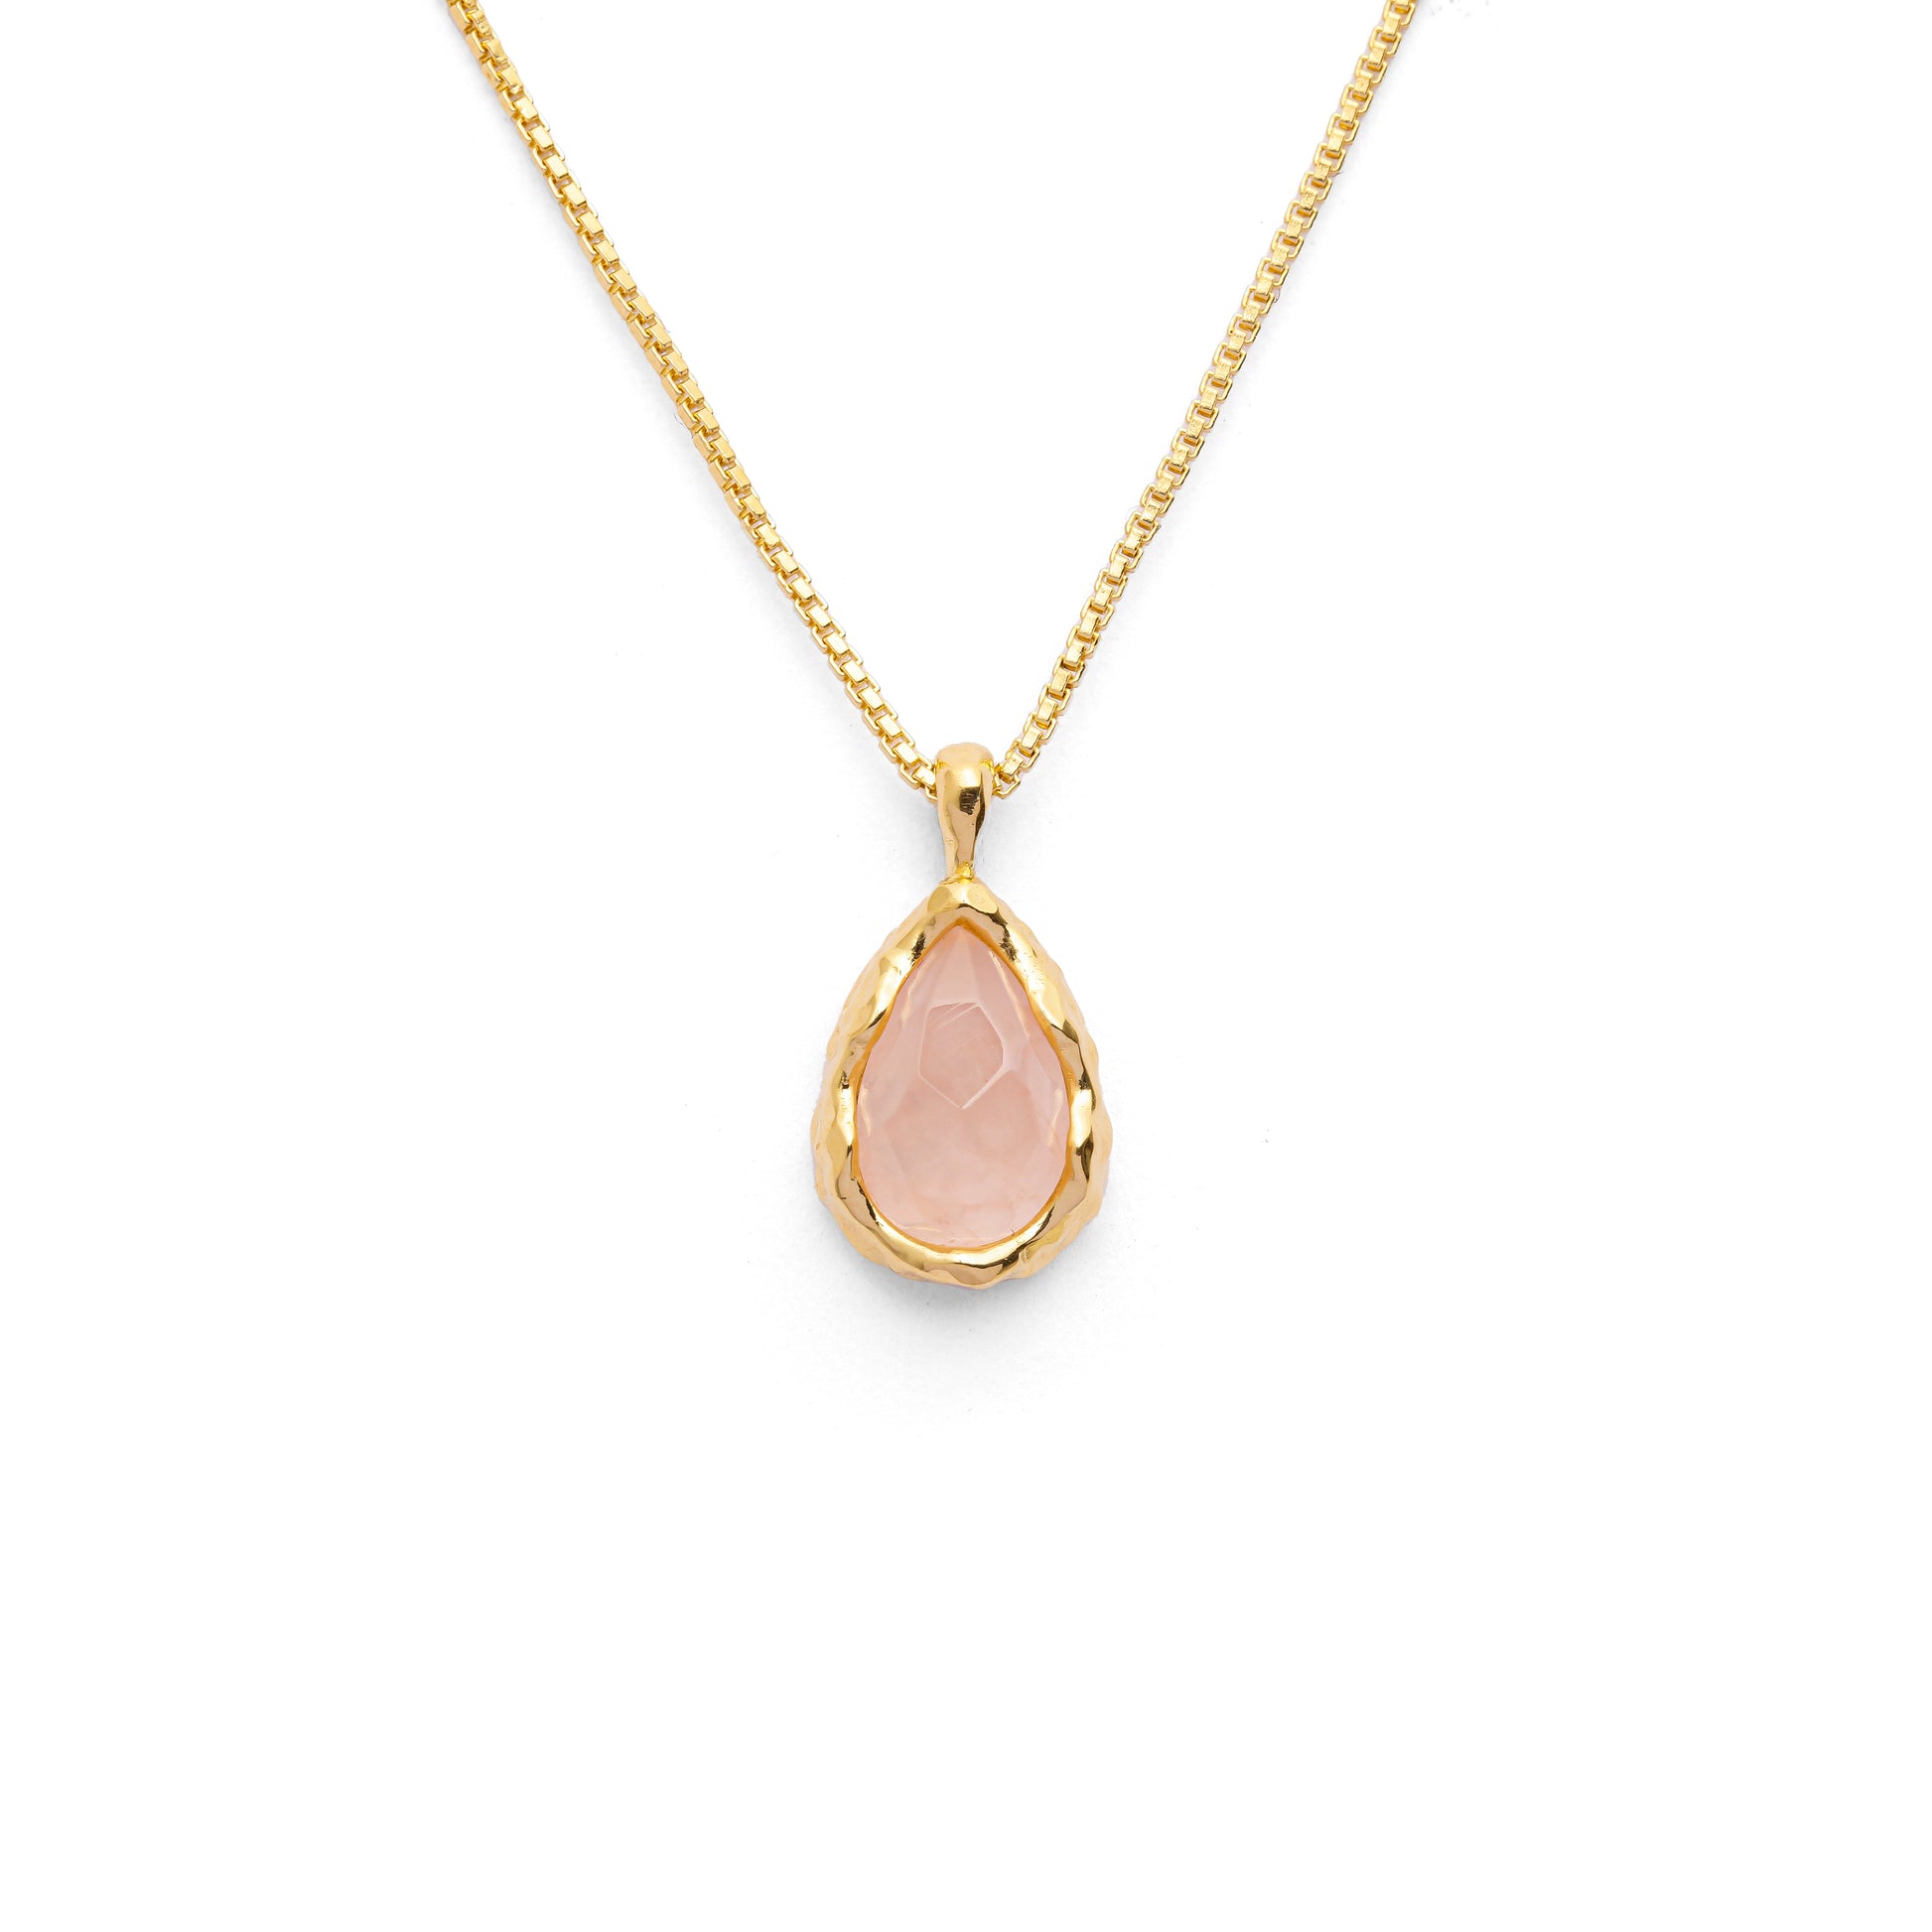 Teardrop shape pink rose quartz pendant with irregular faceting on a 18k gold vermeil box chain on a white background